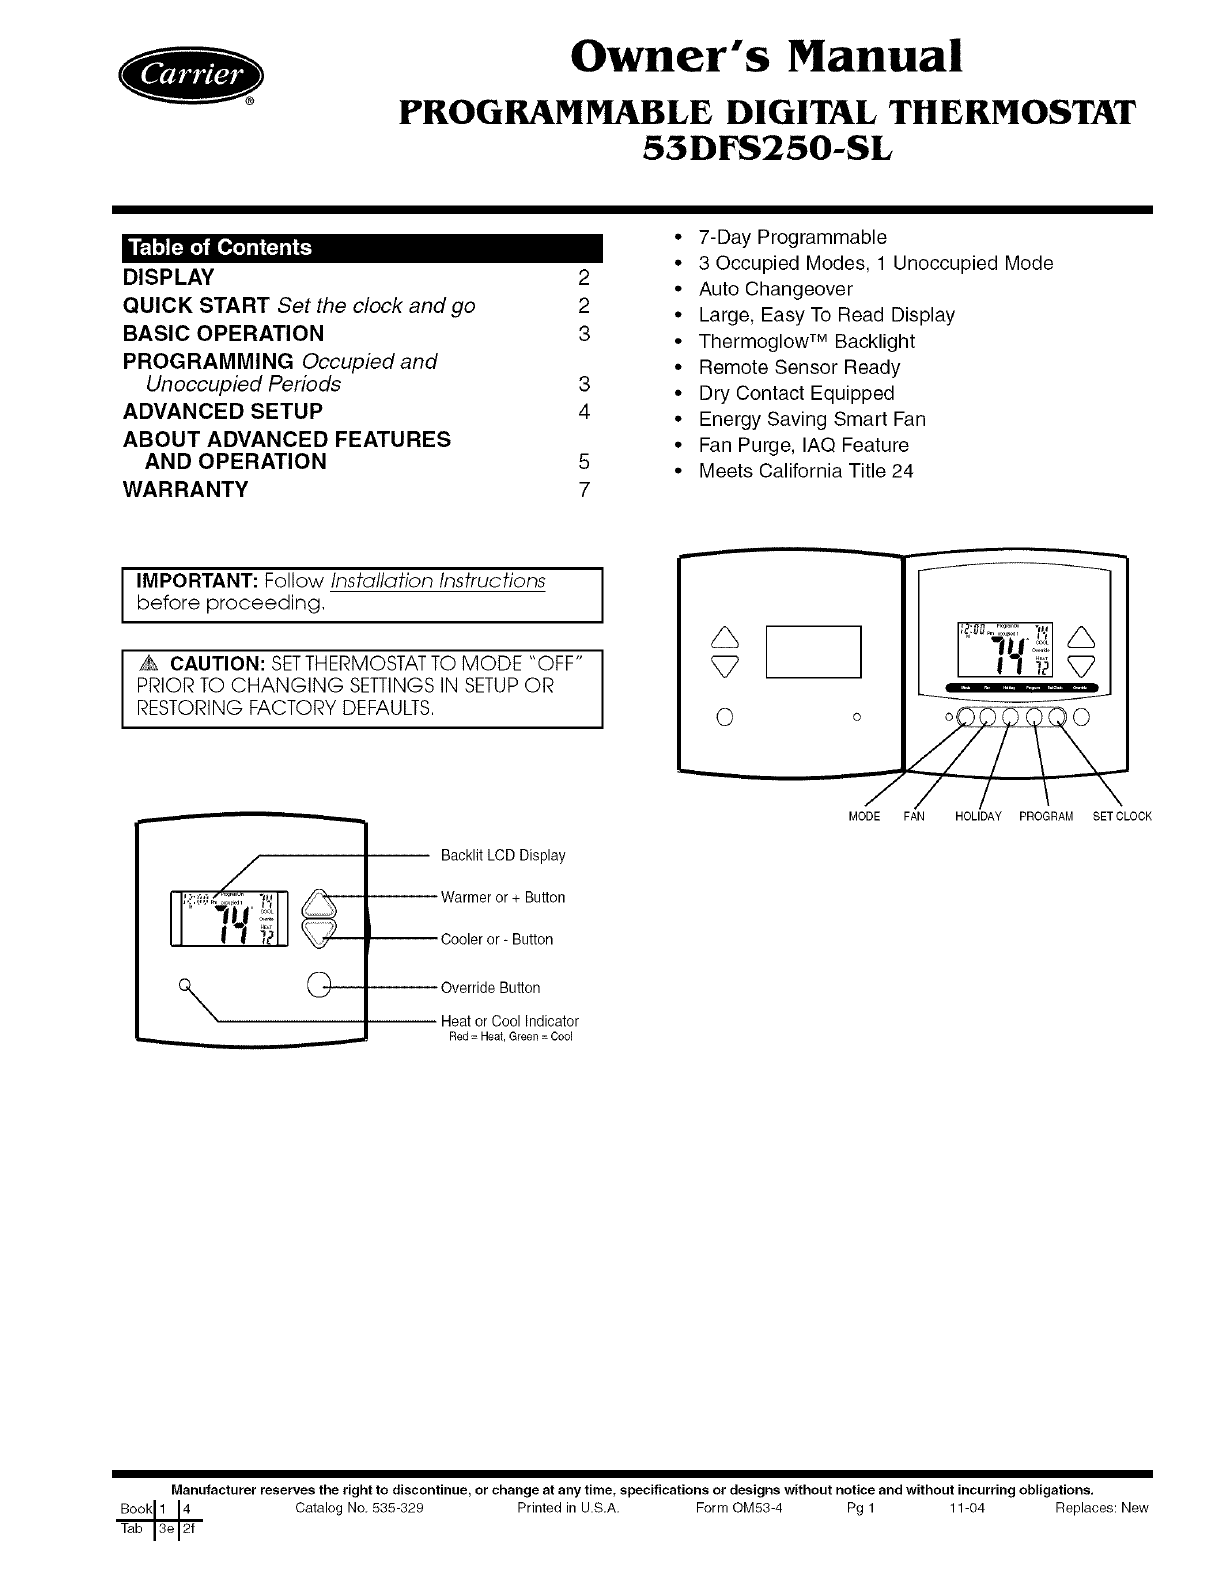 2005 Carrier Thermostat User Manual Pdf